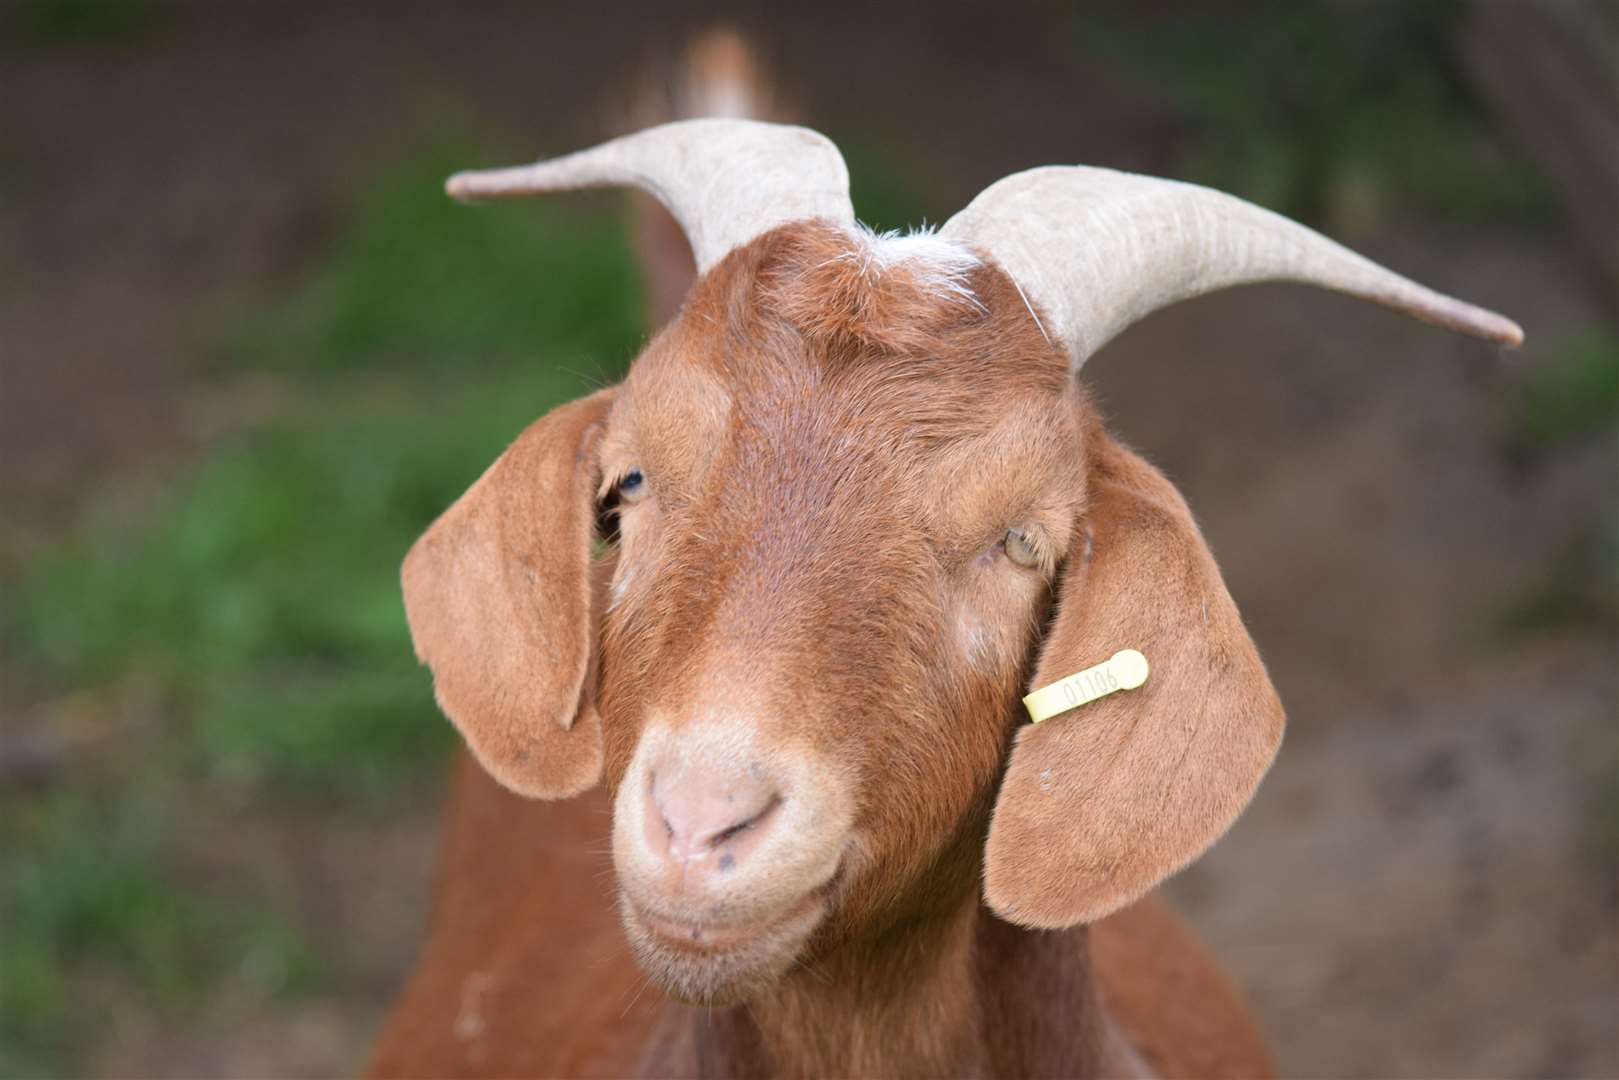 Toffee the goat